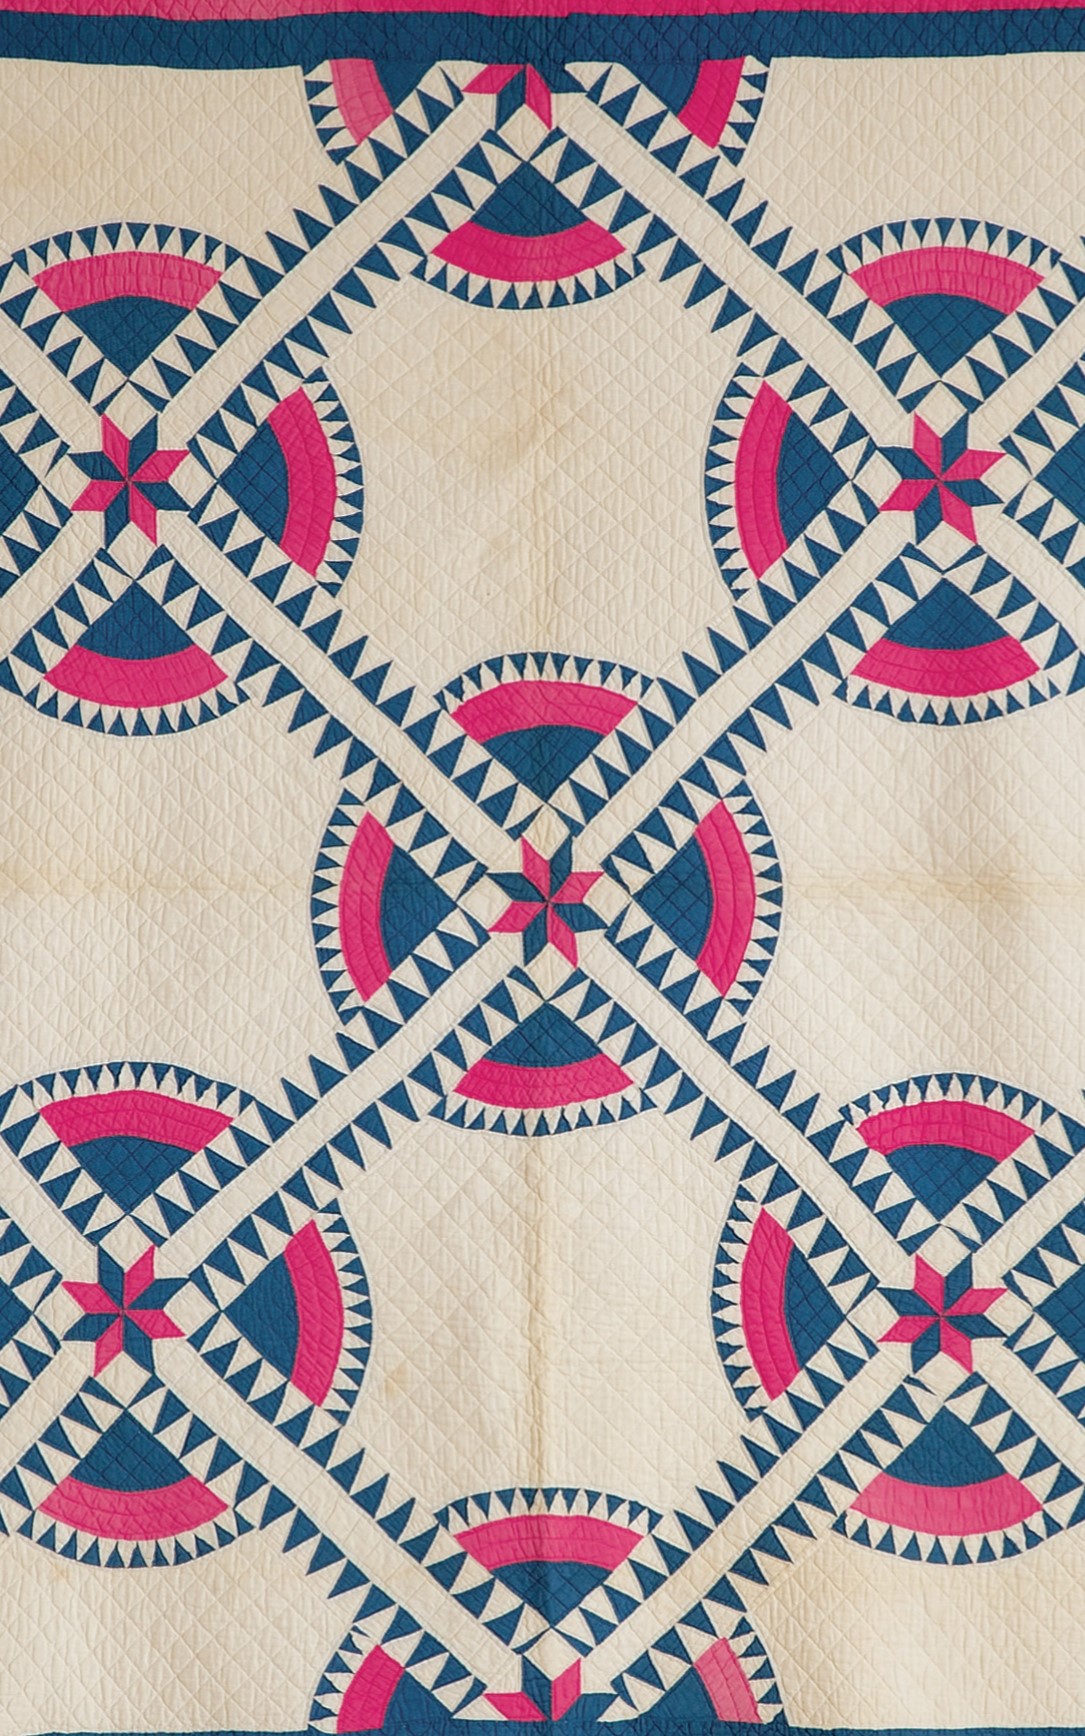 <h3>NEW YORK BEAUTY</h3>
<br>
<p><strong>Pieced Quilt</strong></p>
<p><strong>Second half of the nineteenth century</strong></p>
<p><strong>Gift of Mrs. Ernest Renard</strong></p>
<br>
<p>This striking pattern, known as New York Beauty, is fairly rare –
even in New York State where a quilt survey made in the 1980s
and 1990s turned up relatively few examples. The origin and
history of this pattern remain unknown. Its relative rarity probably
stems from the fact that it is considered a particularly difficult
pattern to make. An accomplished quilter is required to accurately
sew the hundreds of tiny triangles. This pattern is sometimes
called Crown of Thorns. The eight-pointed star at the center of
each divided circle where the overlaying bands cross is called a
Lemoyne Star and is based on a single diamond creating each
point of the star. The dominant stitching in the quilt is known as
crosshatch or grid quilting. This brightly colored New York
Beauty quilt is in remarkably good condition.</p>
<br>
</p>The donor was Helen Storey Renard. Her mother, Alice Storey,
was from Troy, New York, but the family summered in Orient. A
New York State provenance for this quilt is therefore likely but
not certain.</p>